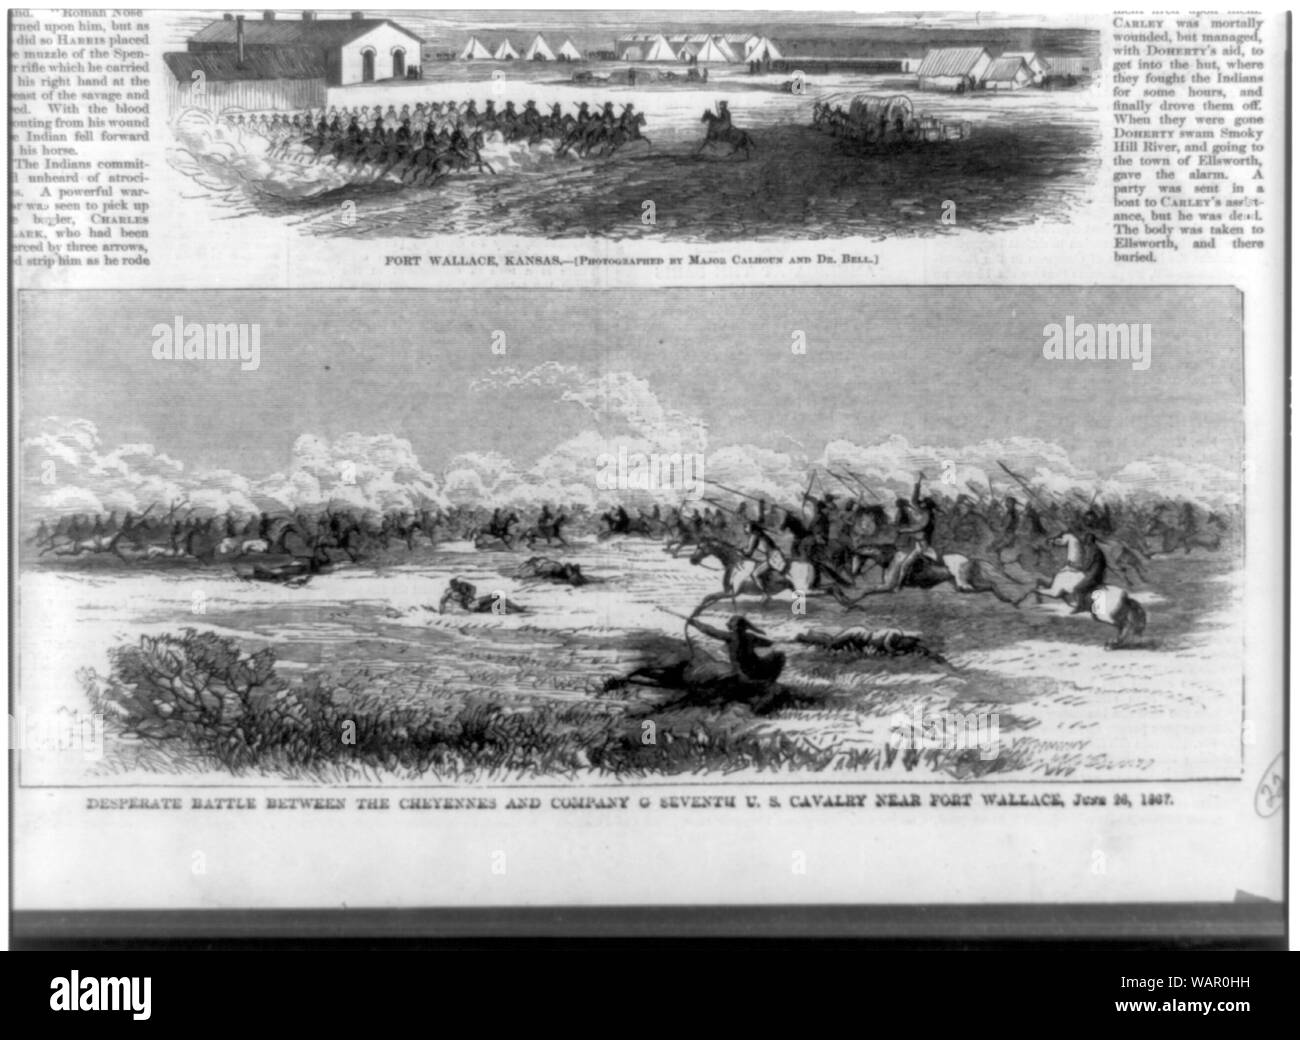 Desperate battle between the Cheyennes and Company C Seventh U.S ...